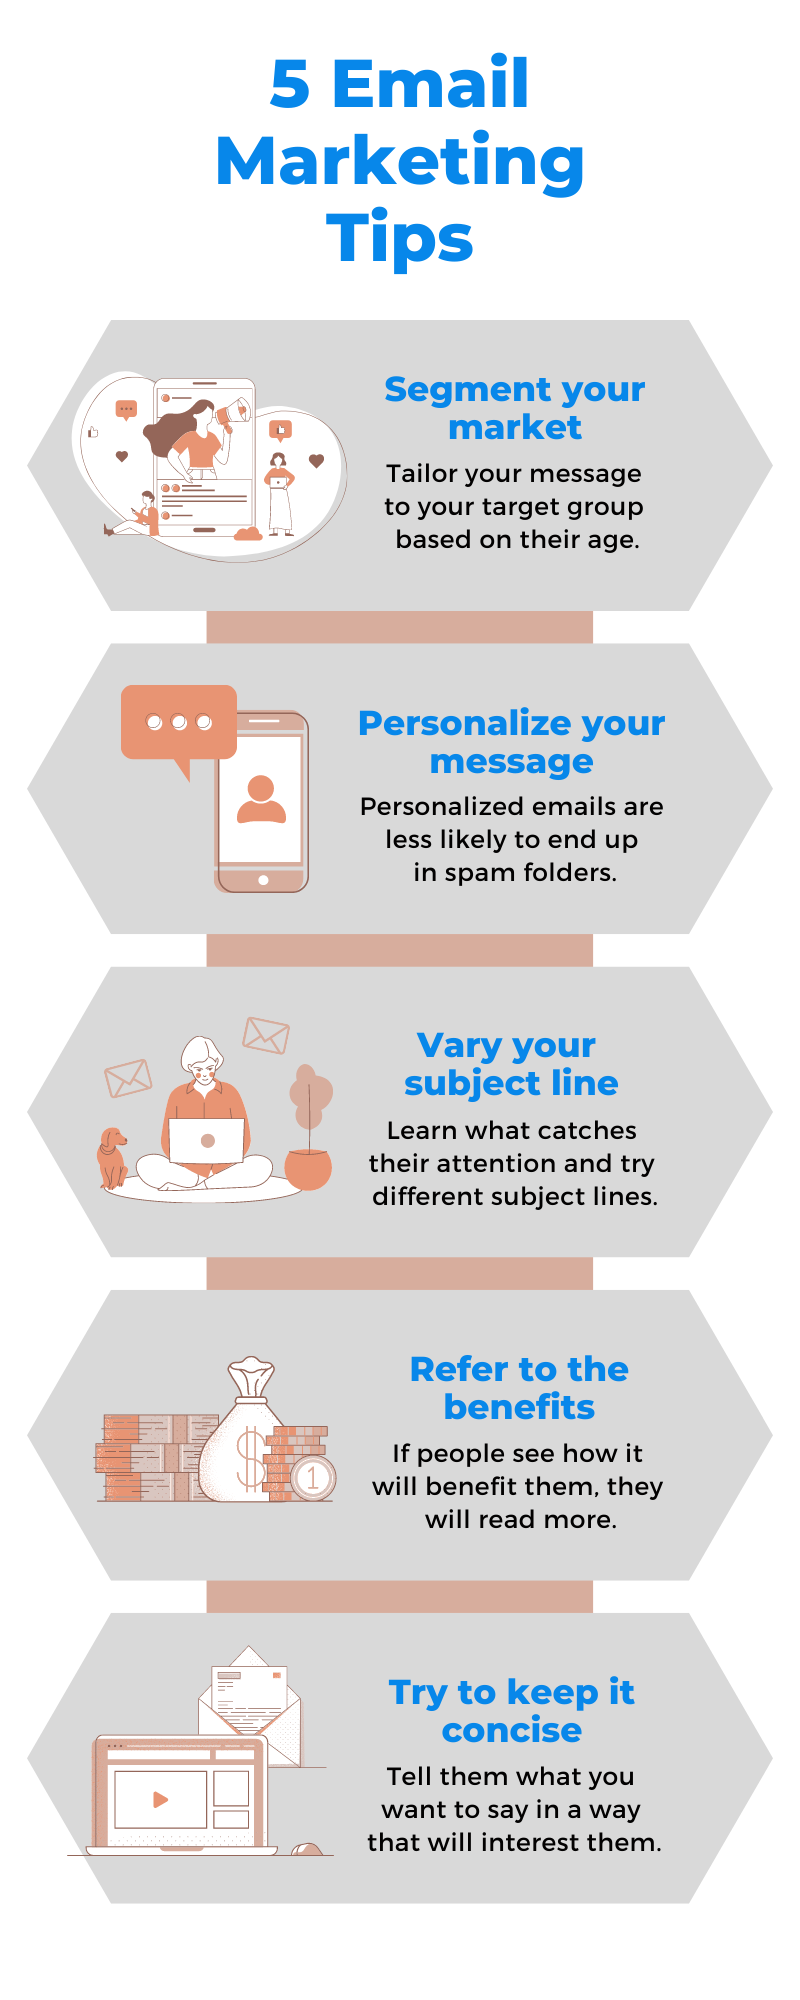 Email Marketing Tips Infographic